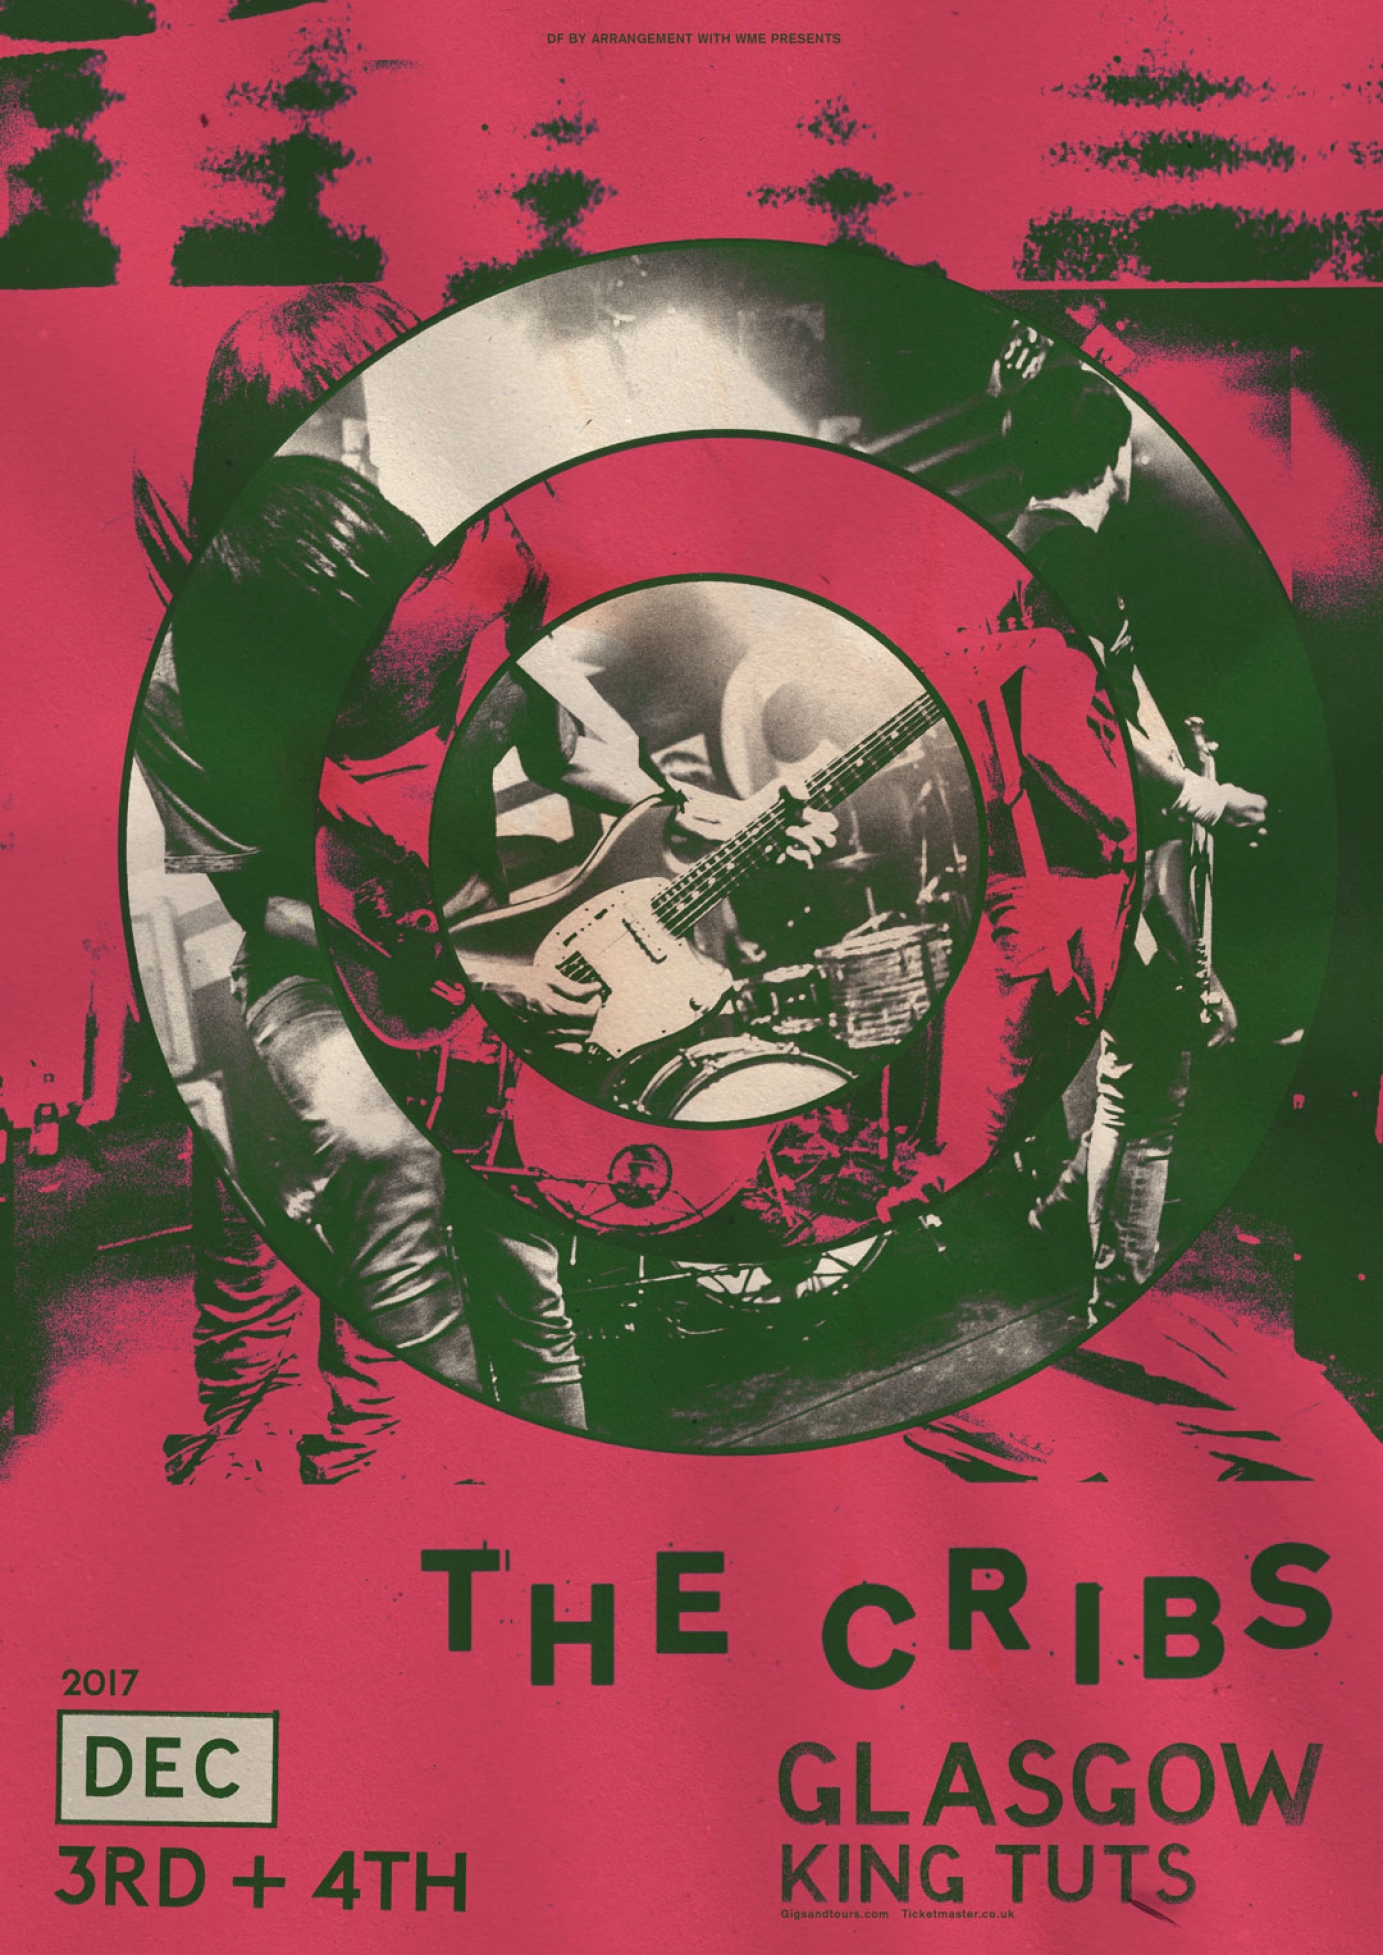 Artwork for The Cribs by narcsville